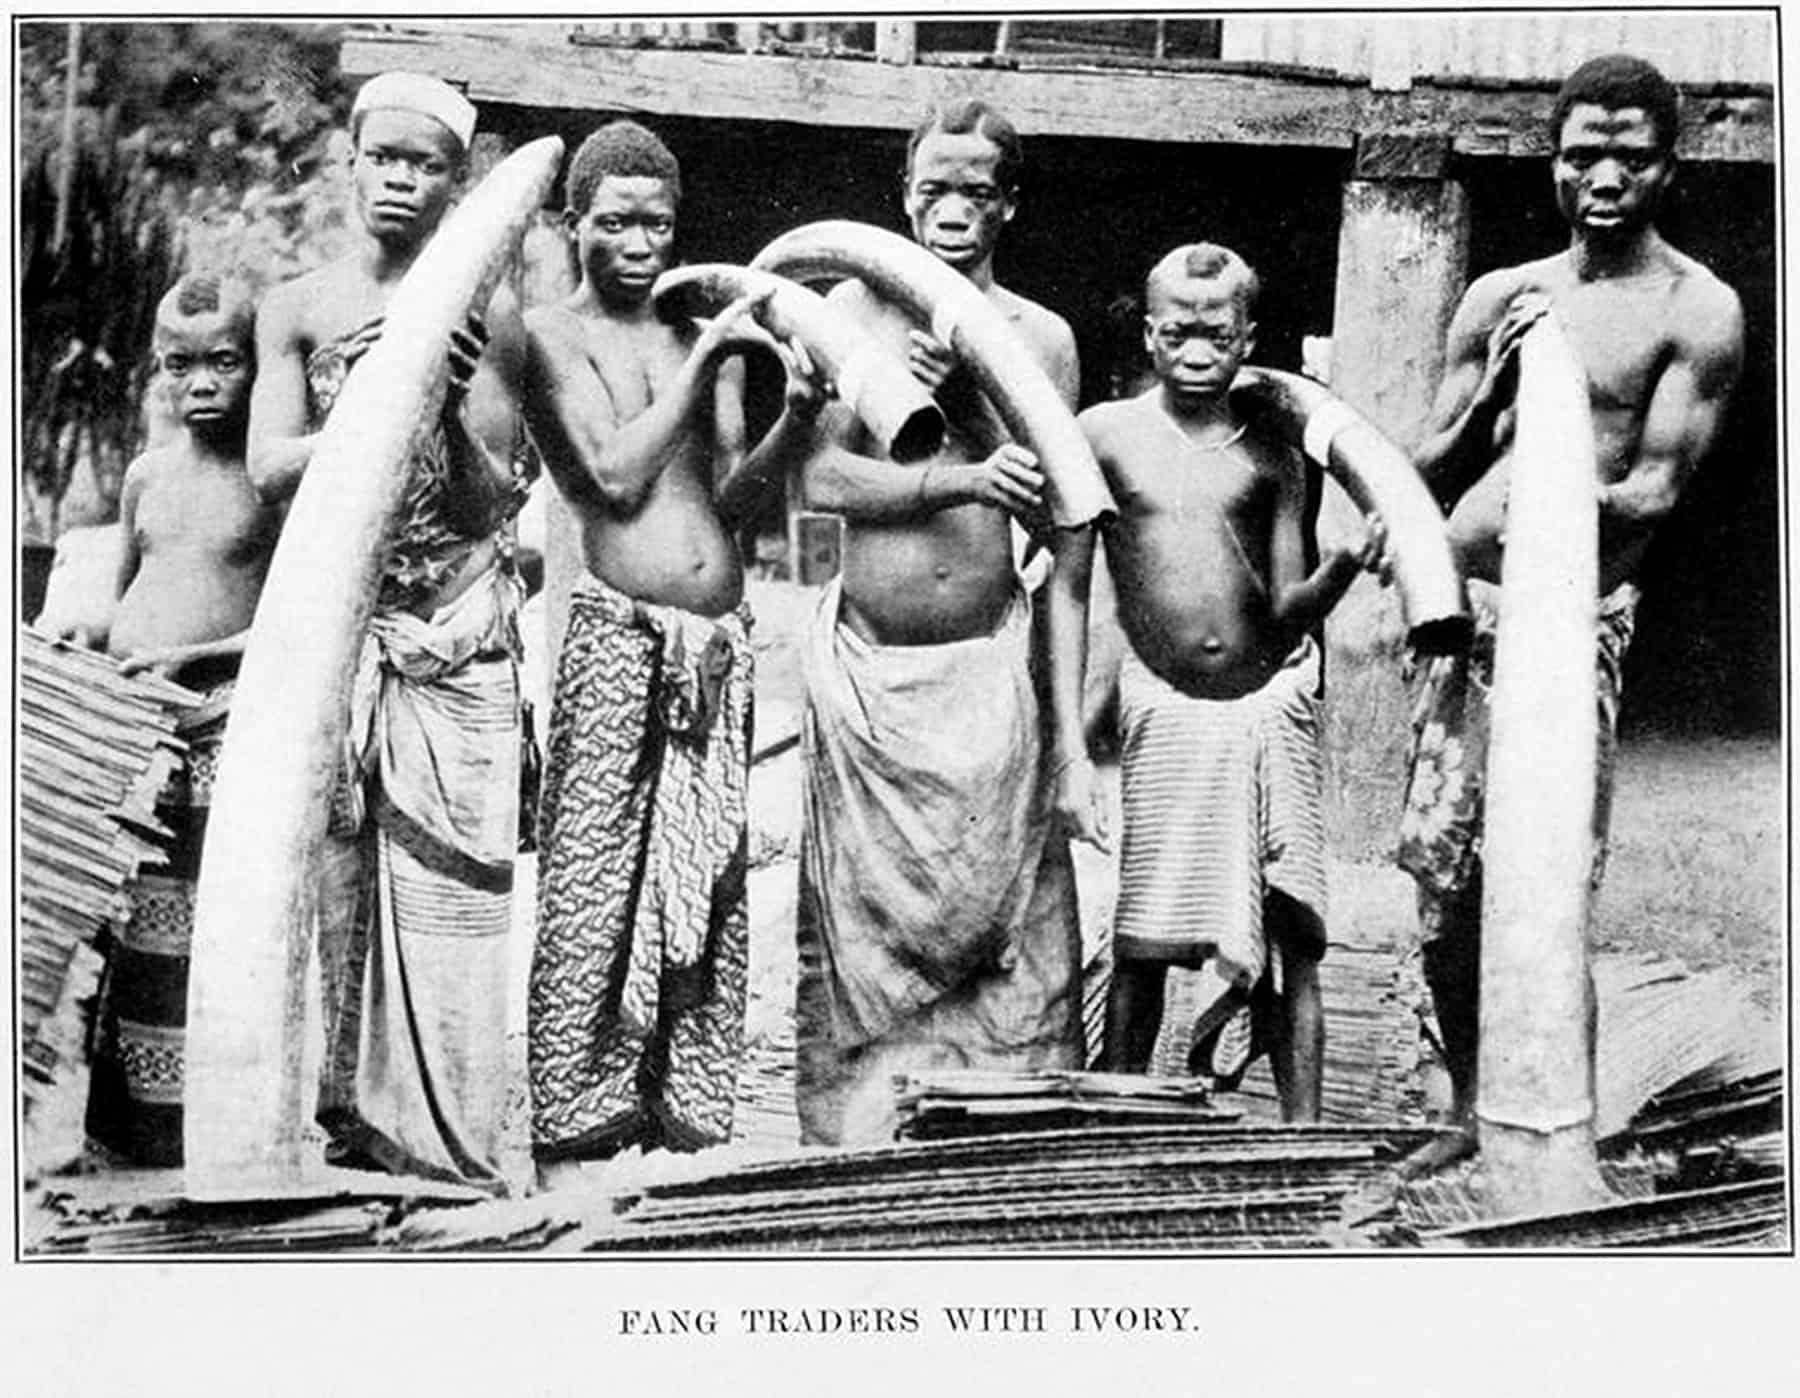 Old photo of ivory traders in Africa holding tusks over their shoulders.